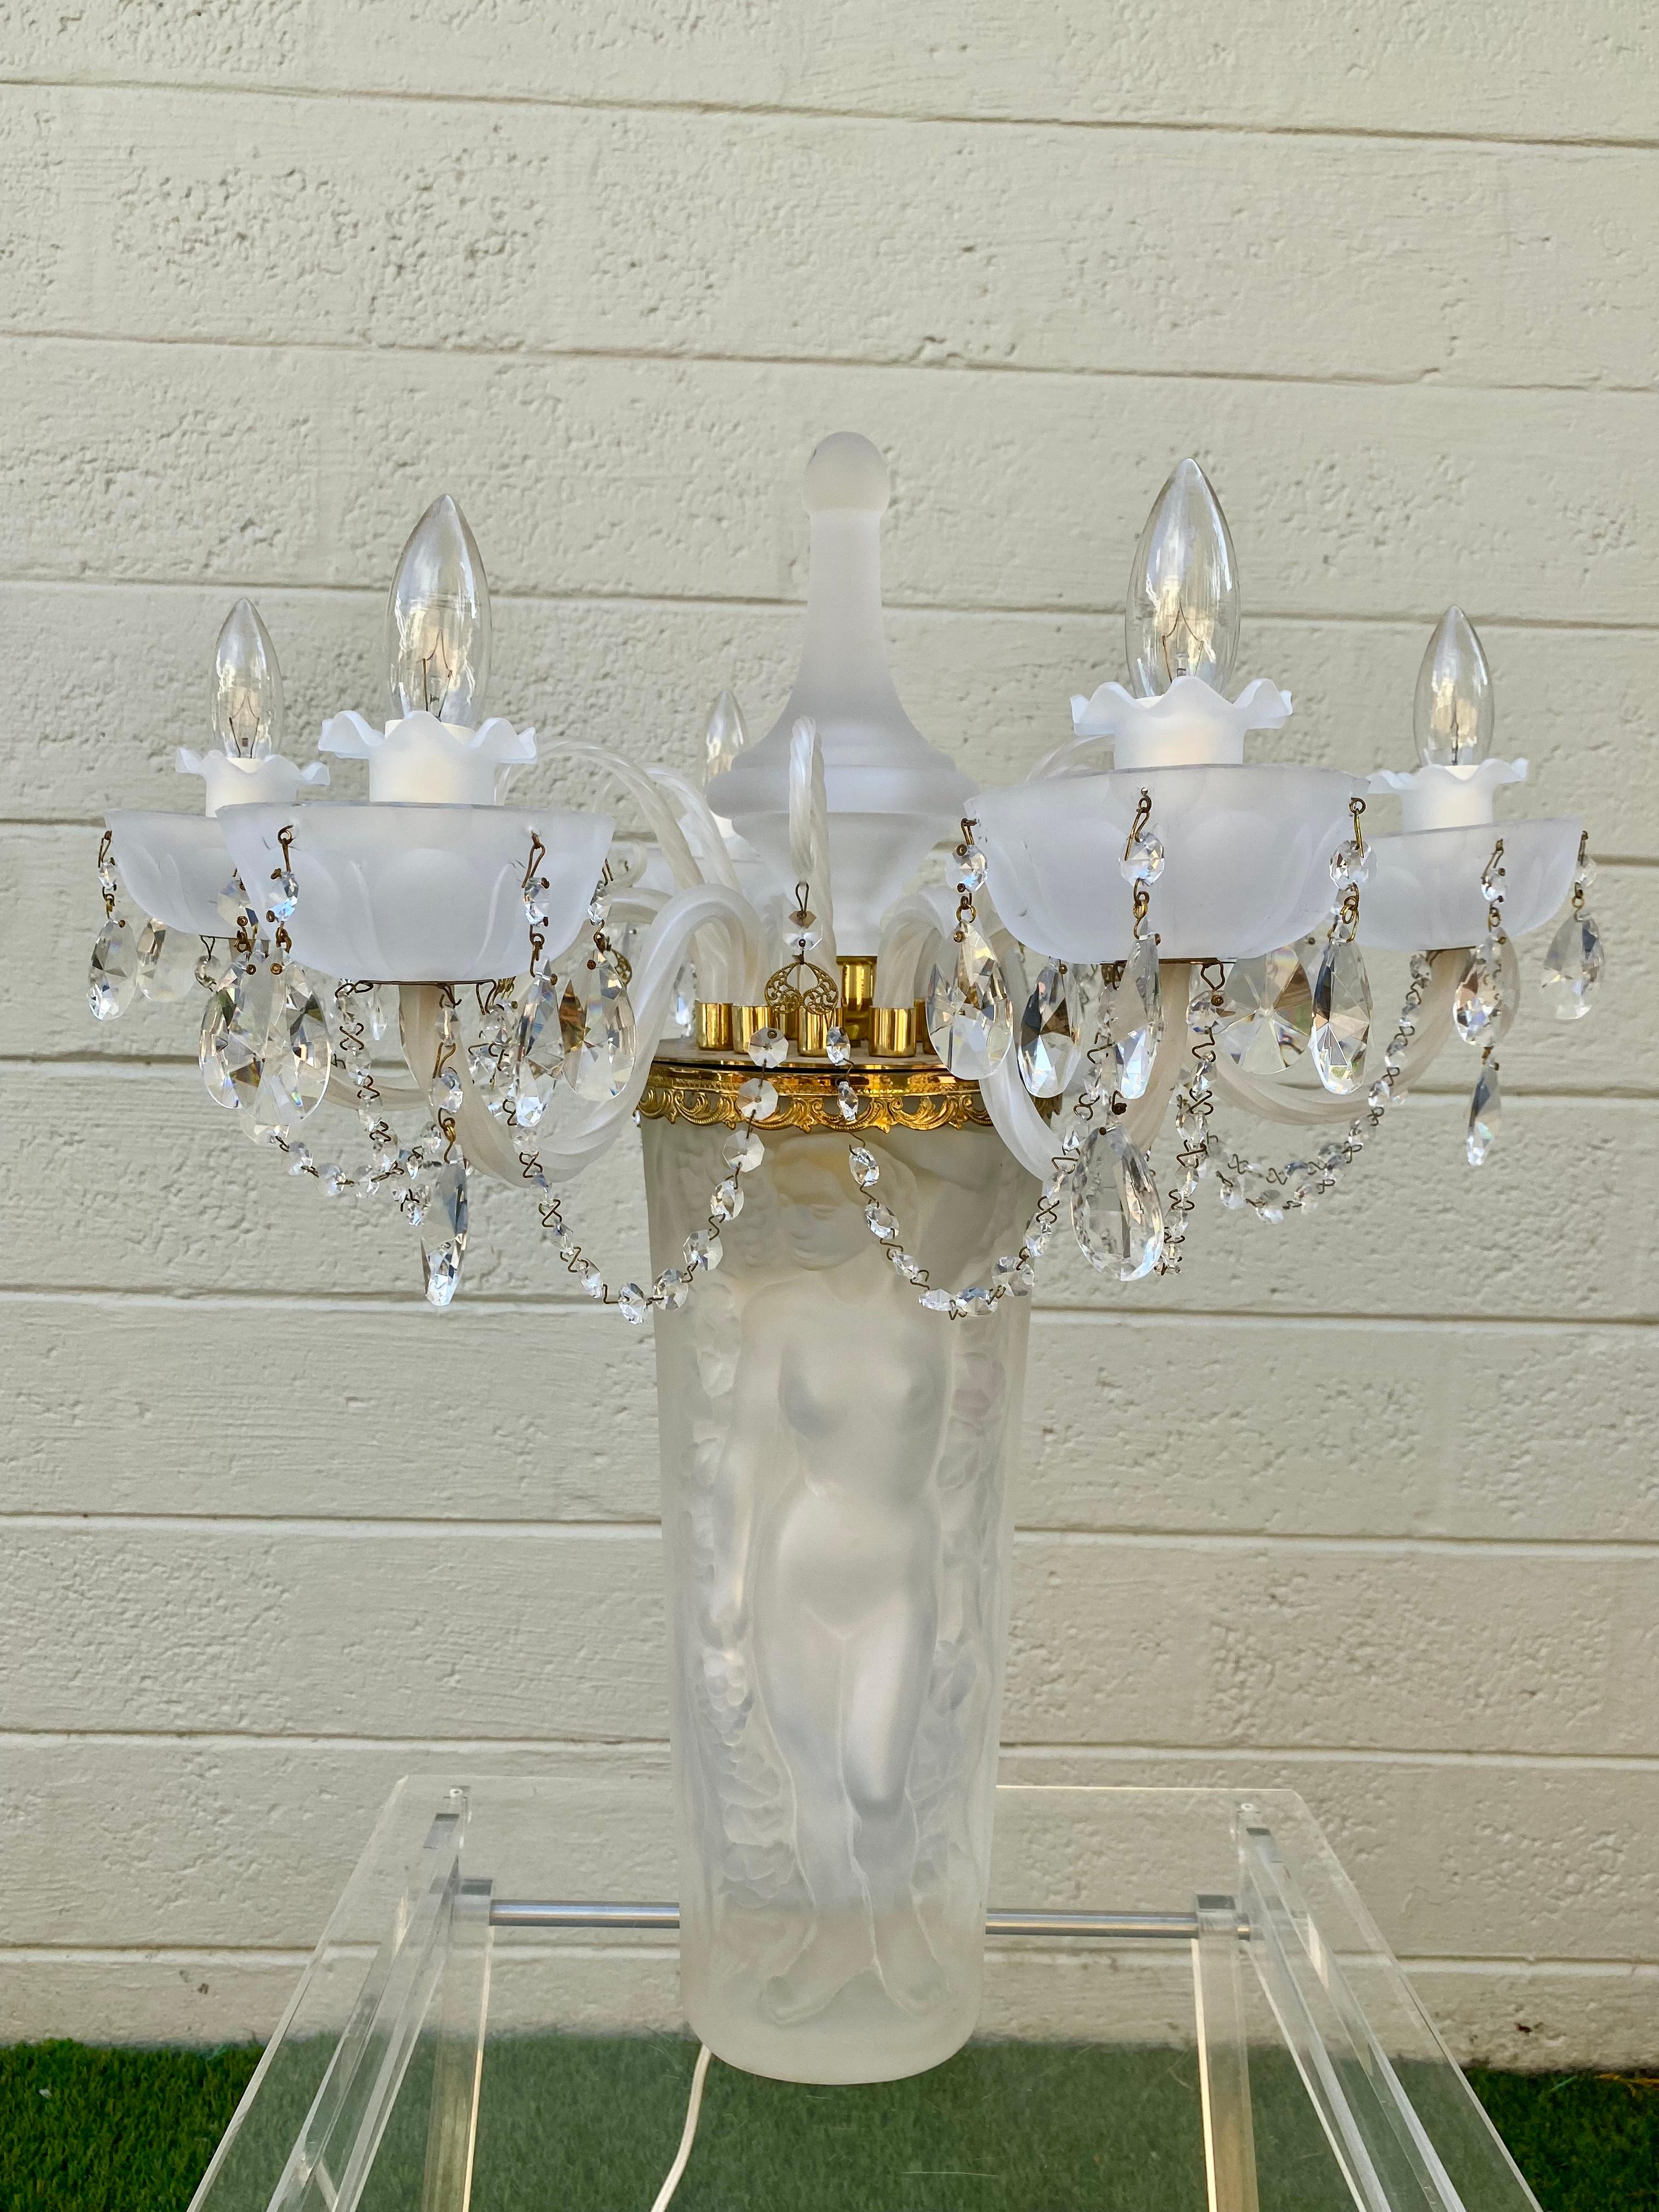 This extremely rare crystal chandelier lamp is packed with personality! Outstanding design is exhibited throughout the monumental form.  Lalique’s boundless imagination and creative genius lead to the creation of the Bacchantes lamp. The iconic